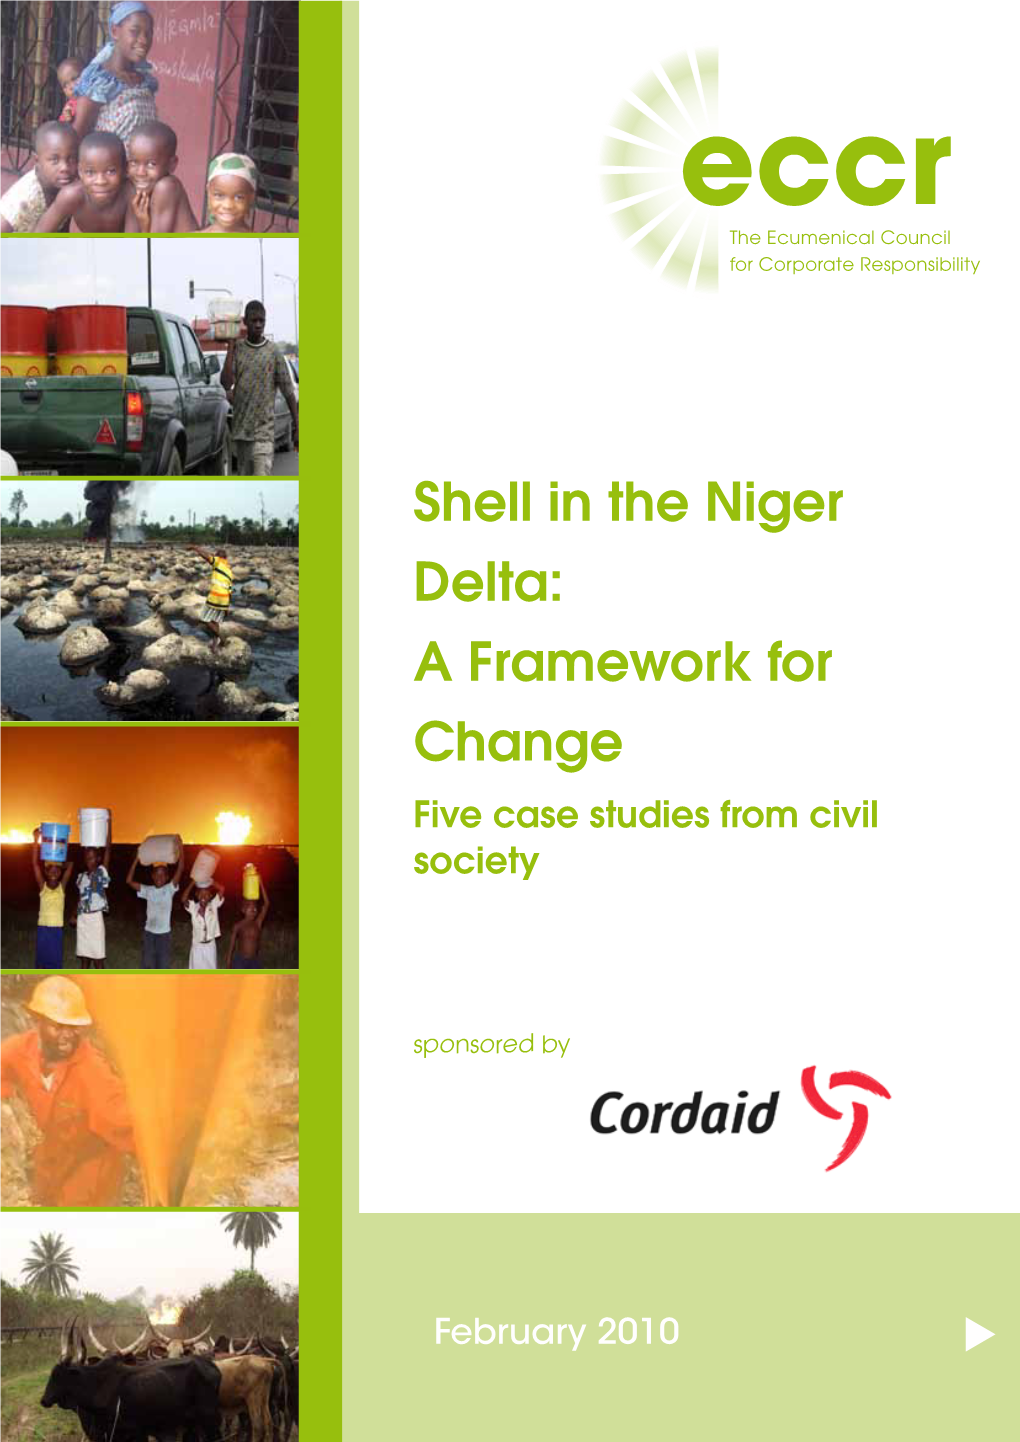 Shell in the Niger Delta: a Framework for Change Five Case Studies from Civil Society